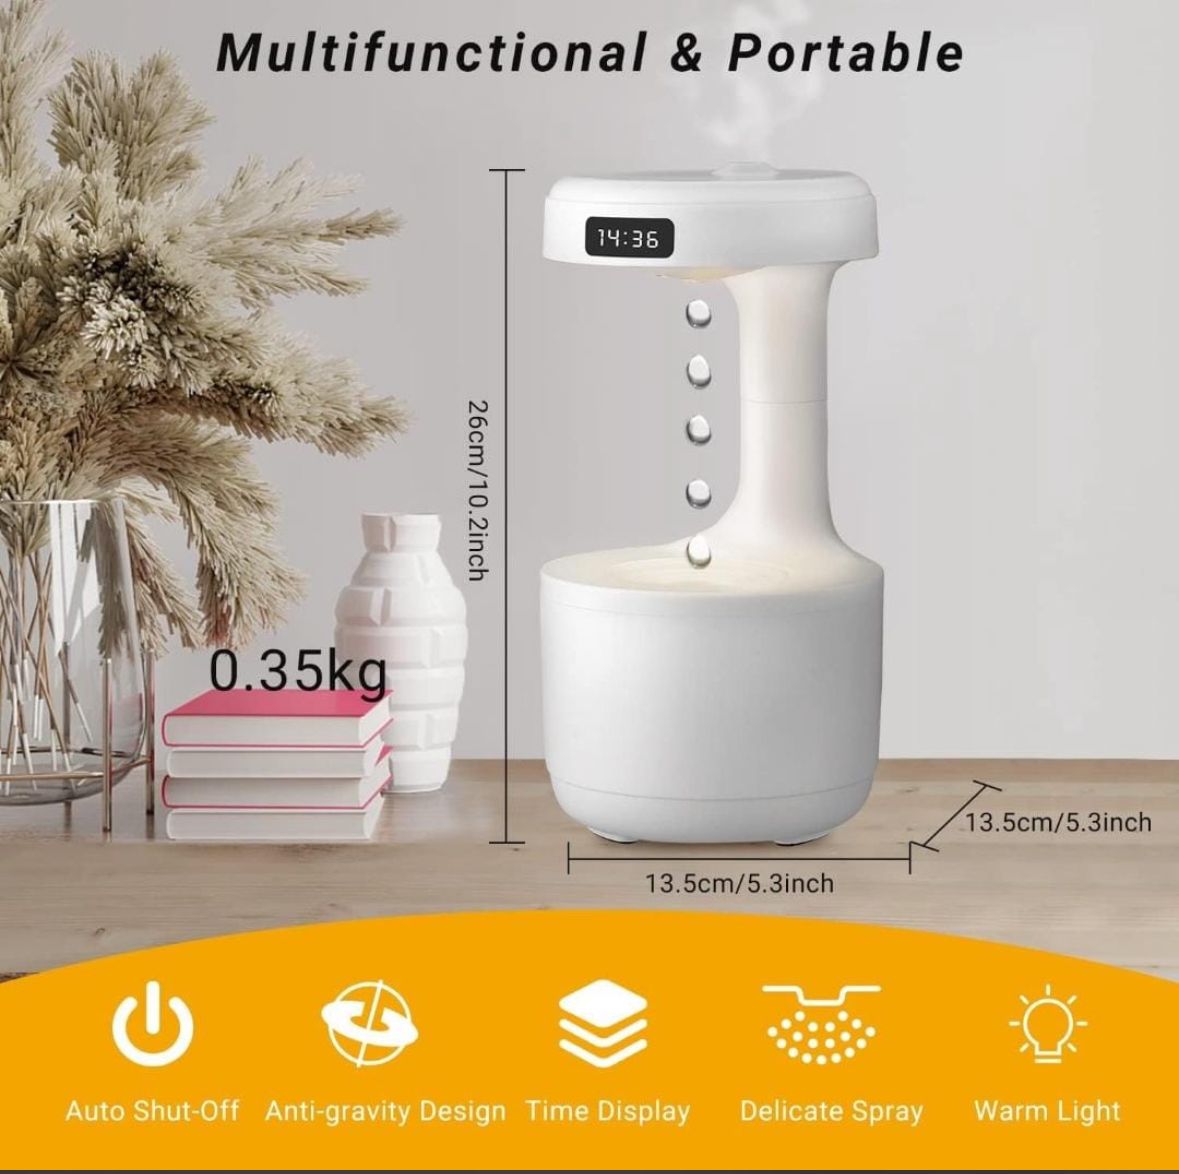 Humidity Diffuser Anti-Gravity Water Drop Design With Sound For Room With 24Hrs Led Display For Moisture Humidity Top-Rated Cool Mist Humidifiers, 800 ML